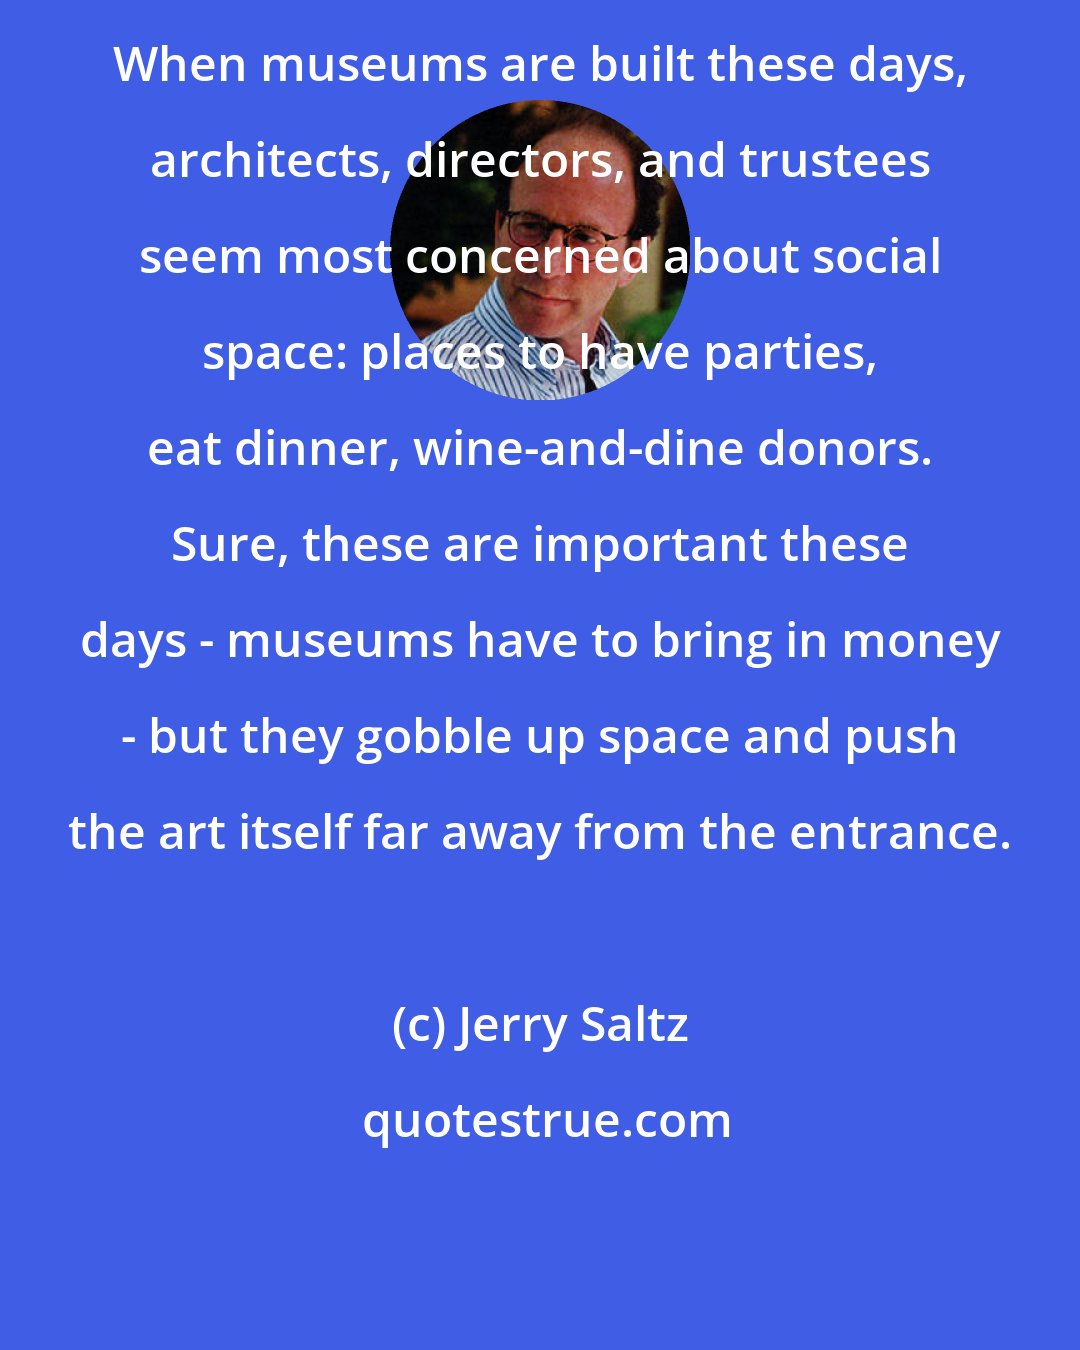 Jerry Saltz: When museums are built these days, architects, directors, and trustees seem most concerned about social space: places to have parties, eat dinner, wine-and-dine donors. Sure, these are important these days - museums have to bring in money - but they gobble up space and push the art itself far away from the entrance.